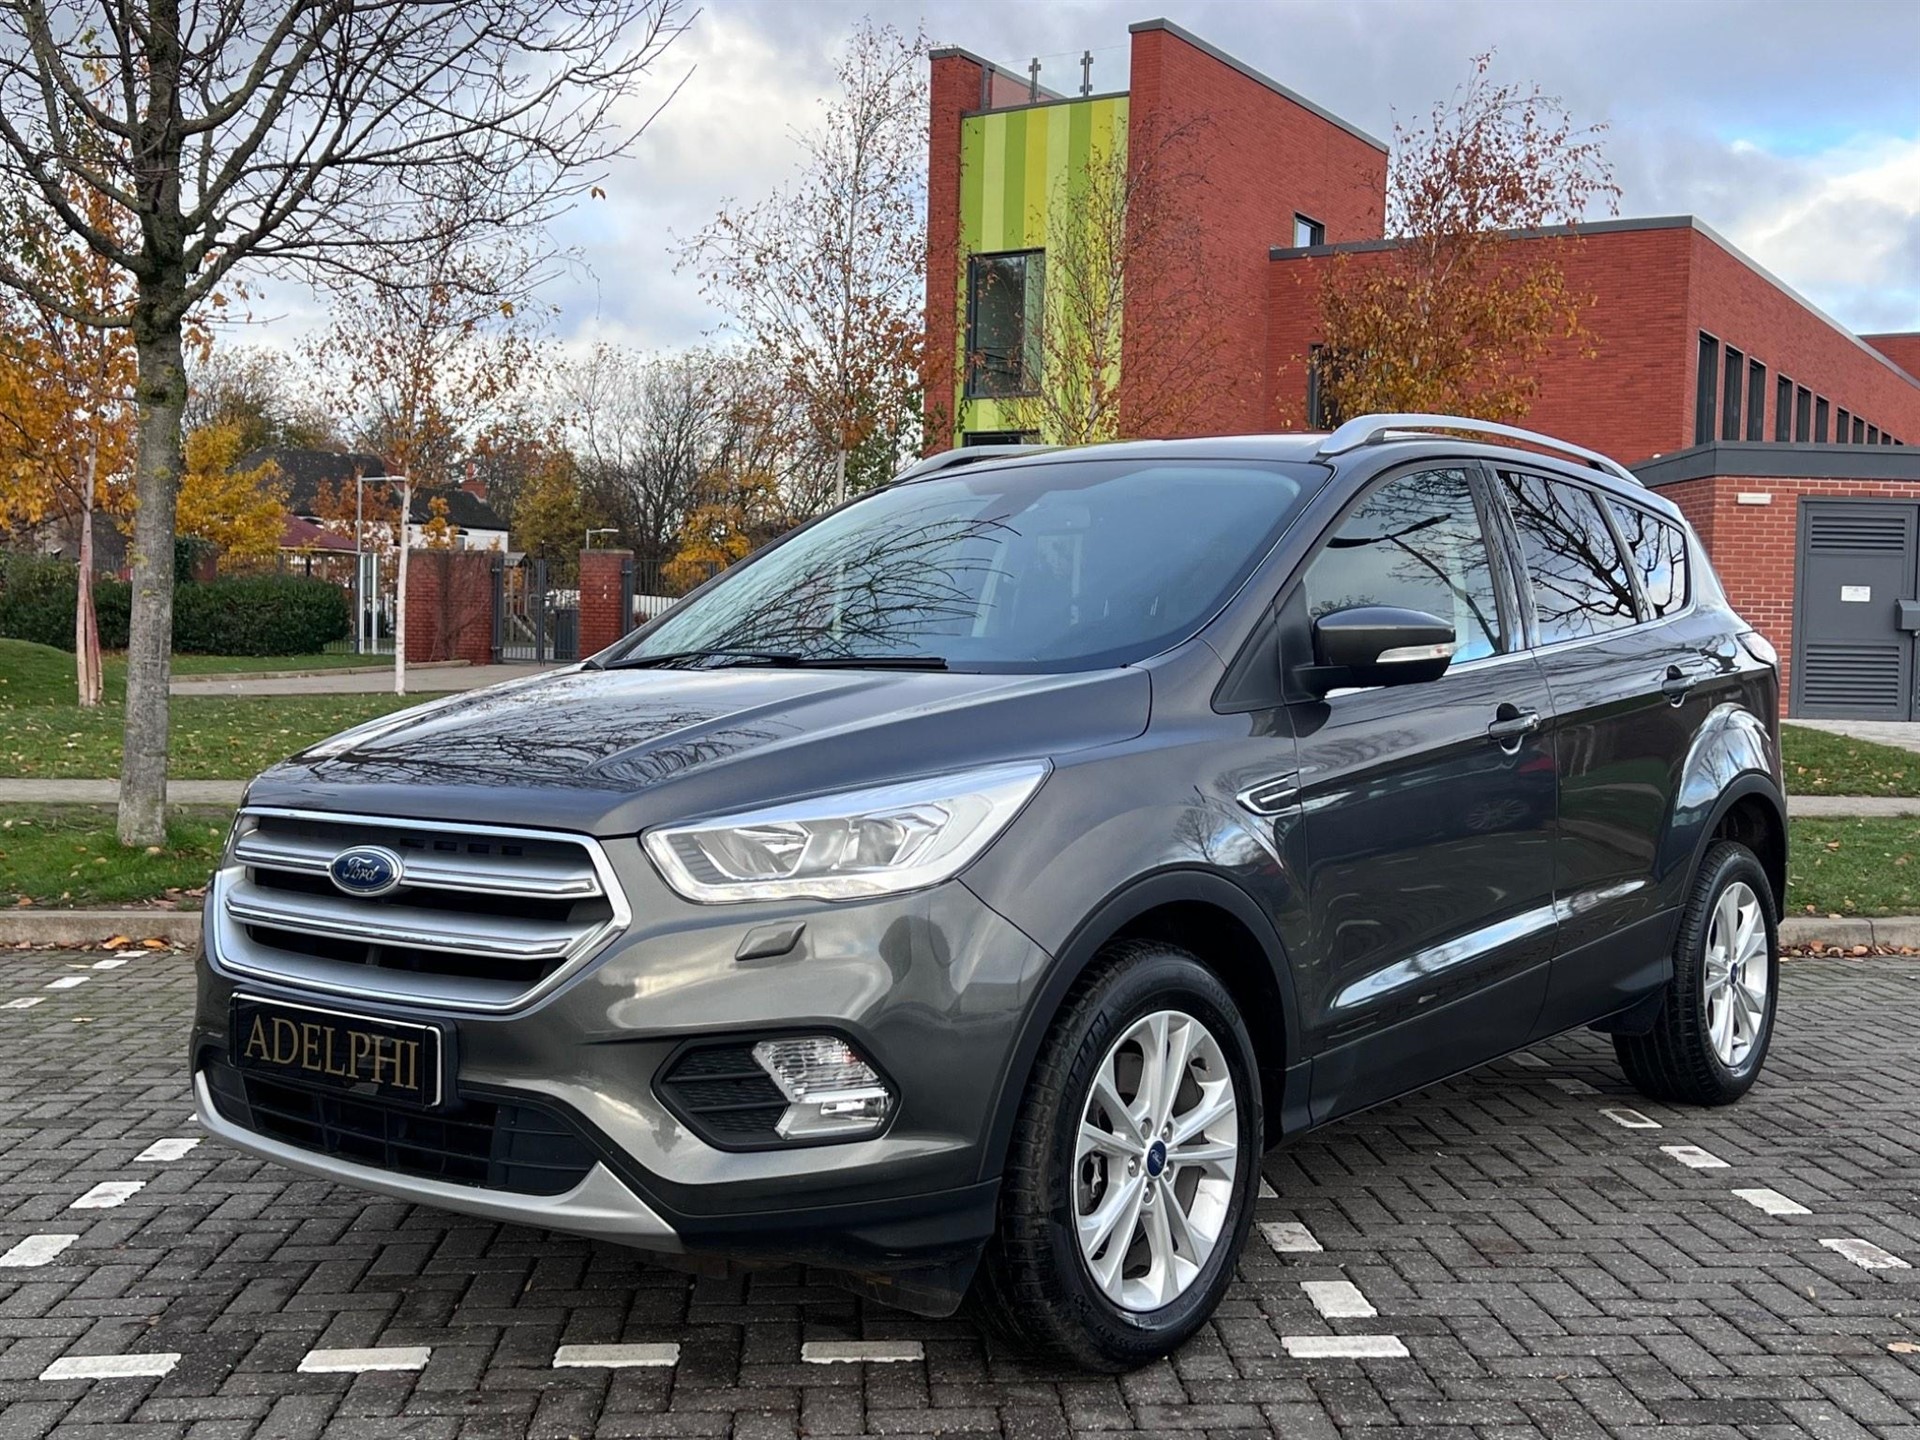 Used Ford Kuga for sale in Sheffield, South Yorkshire